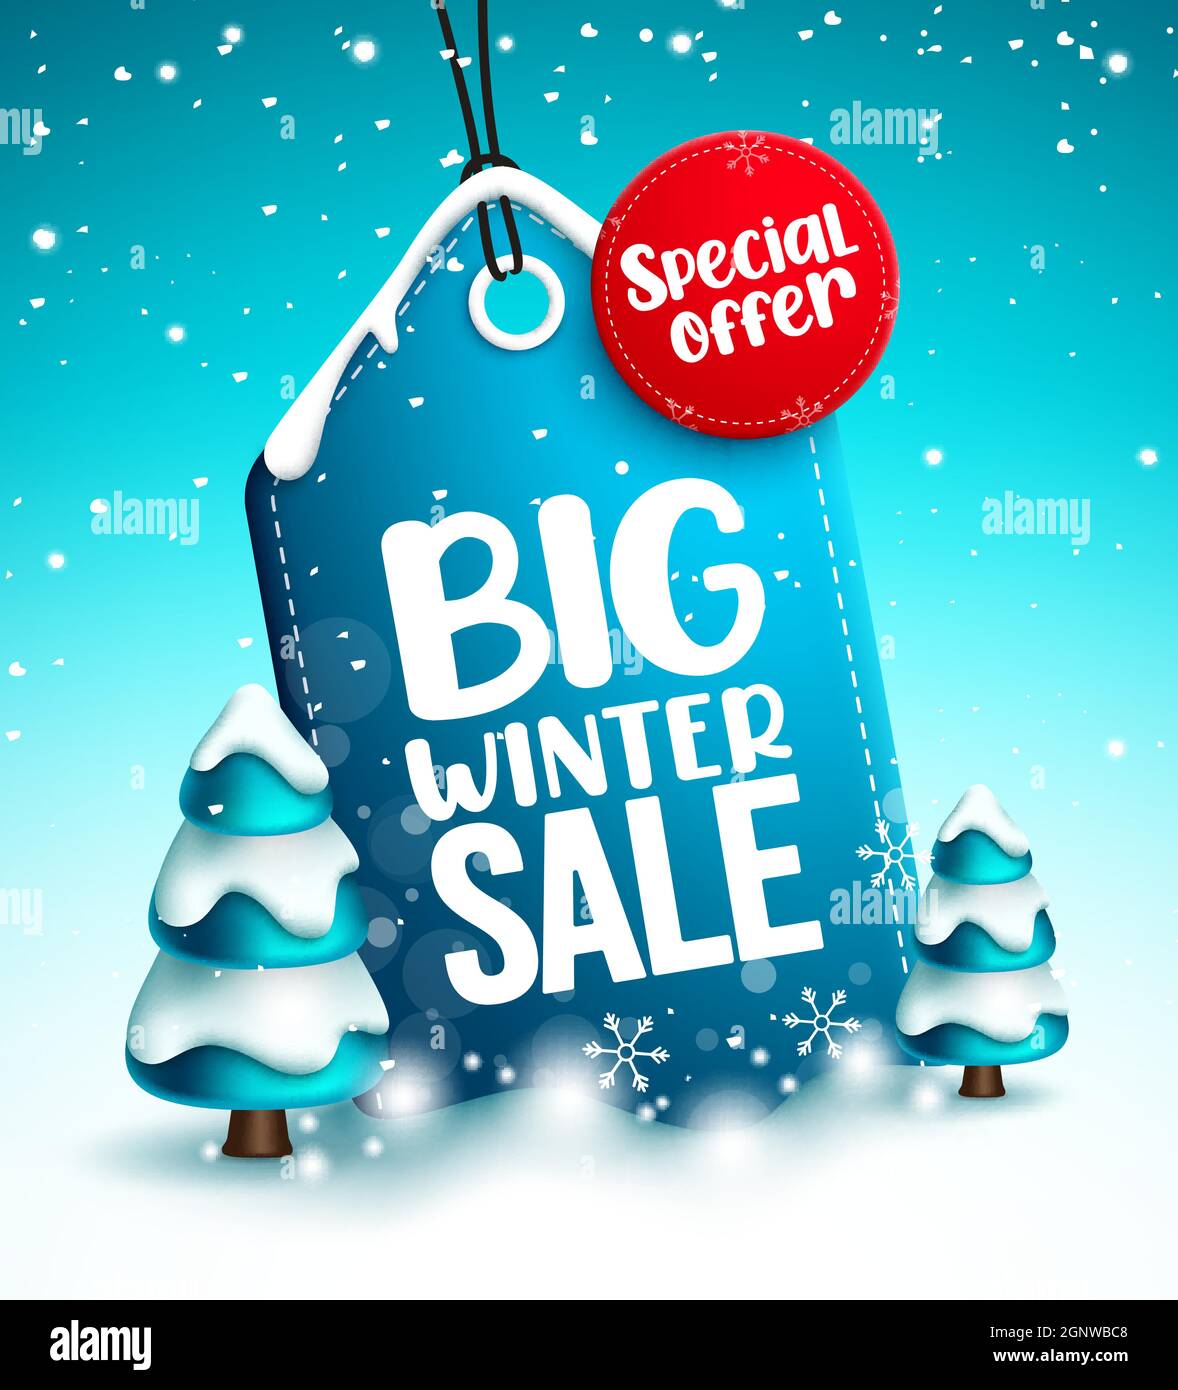 https://c8.alamy.com/comp/2GNWBC8/winter-sale-tag-vector-design-winter-big-sale-special-offer-text-in-discount-label-element-in-snow-background-for-seasonal-shopping-promotion-2GNWBC8.jpg